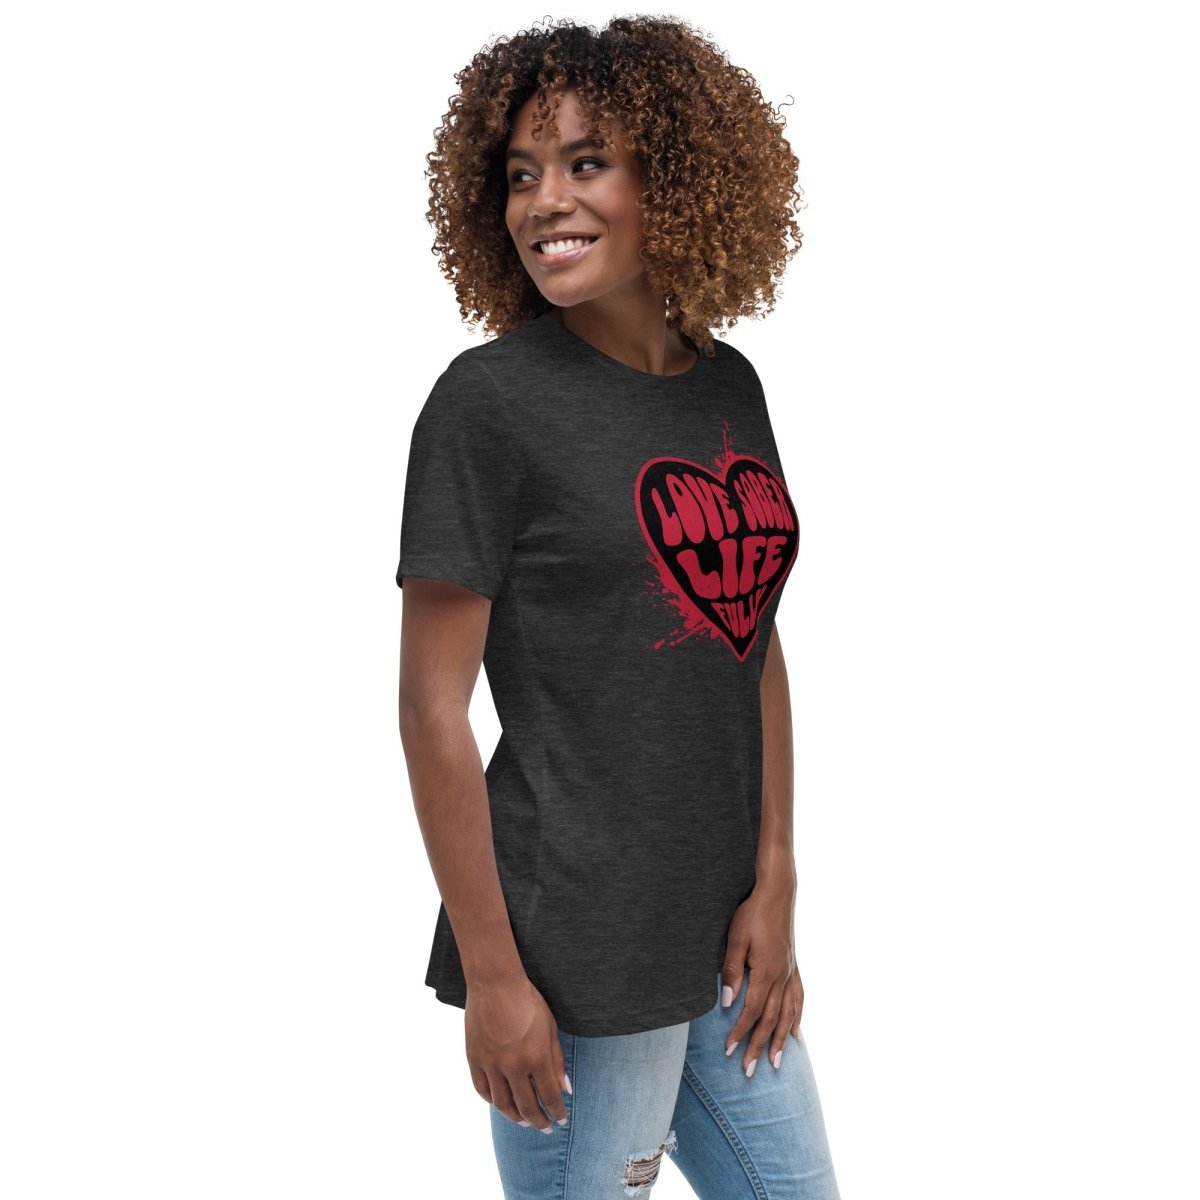 "Serenity & Strength" - 'Love Sober Life Fully' Women's Relaxed Fit T-Shirt - | Sobervation